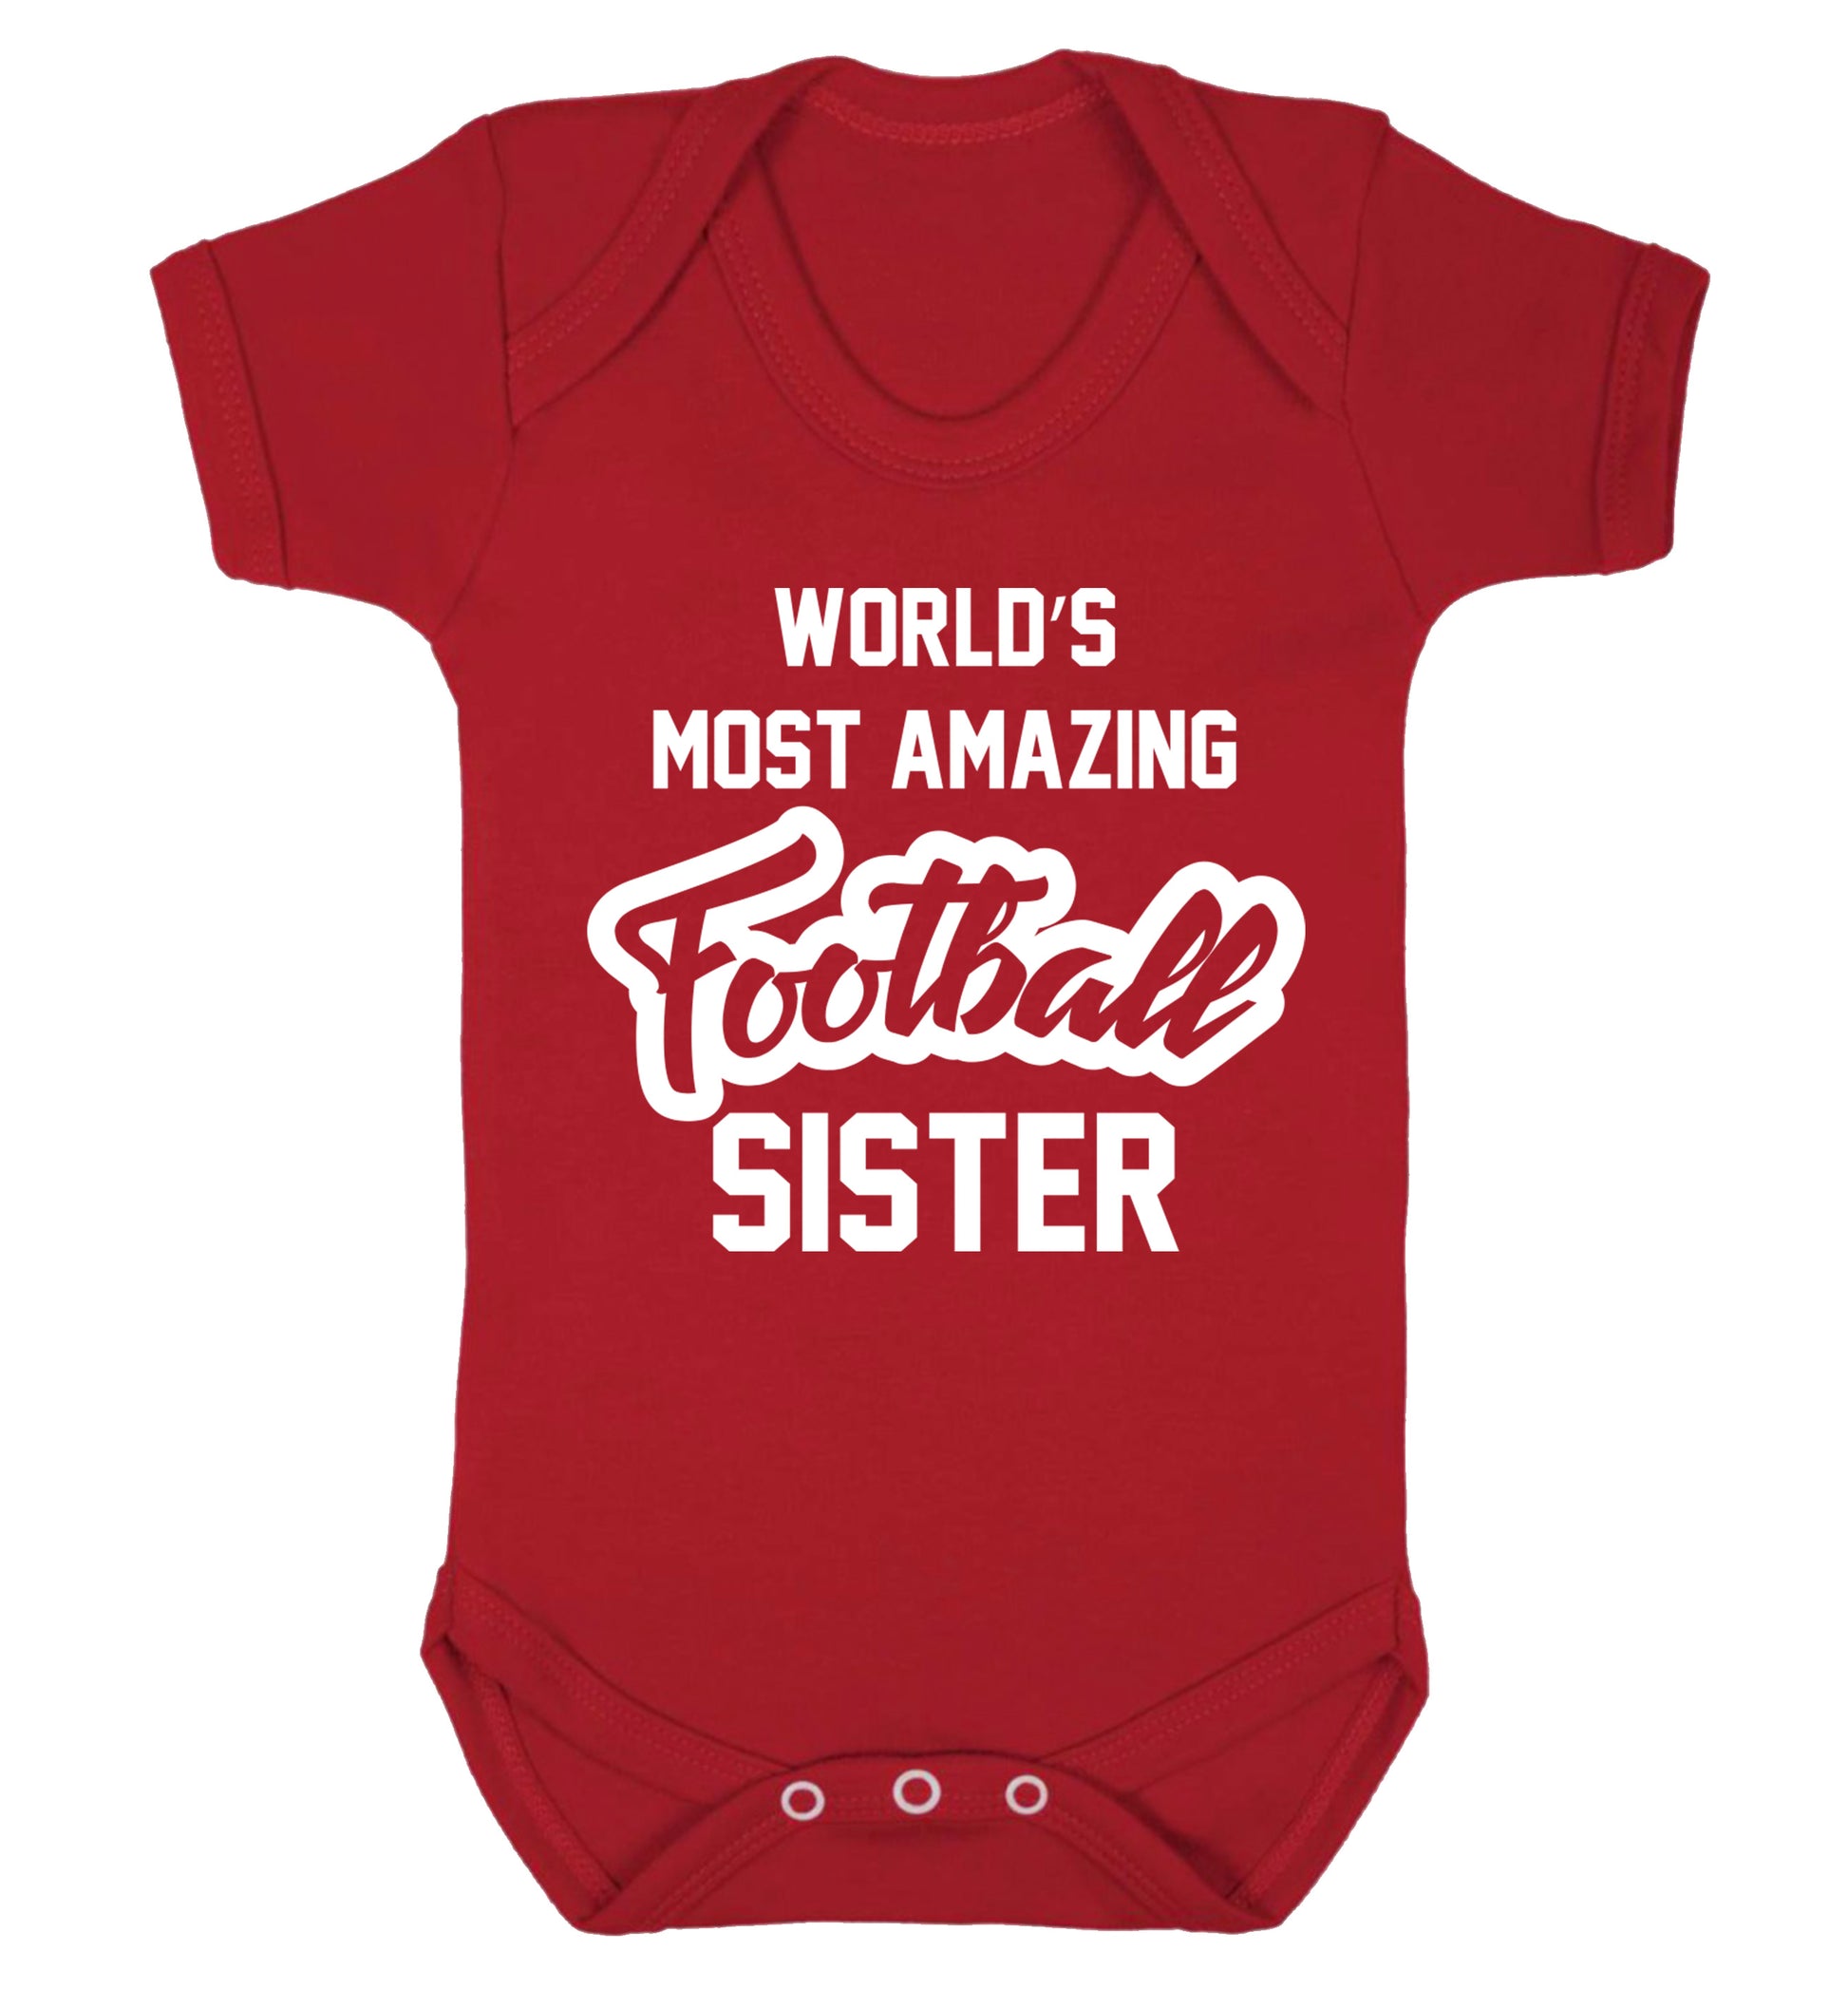 Worlds most amazing football sister Baby Vest red 18-24 months